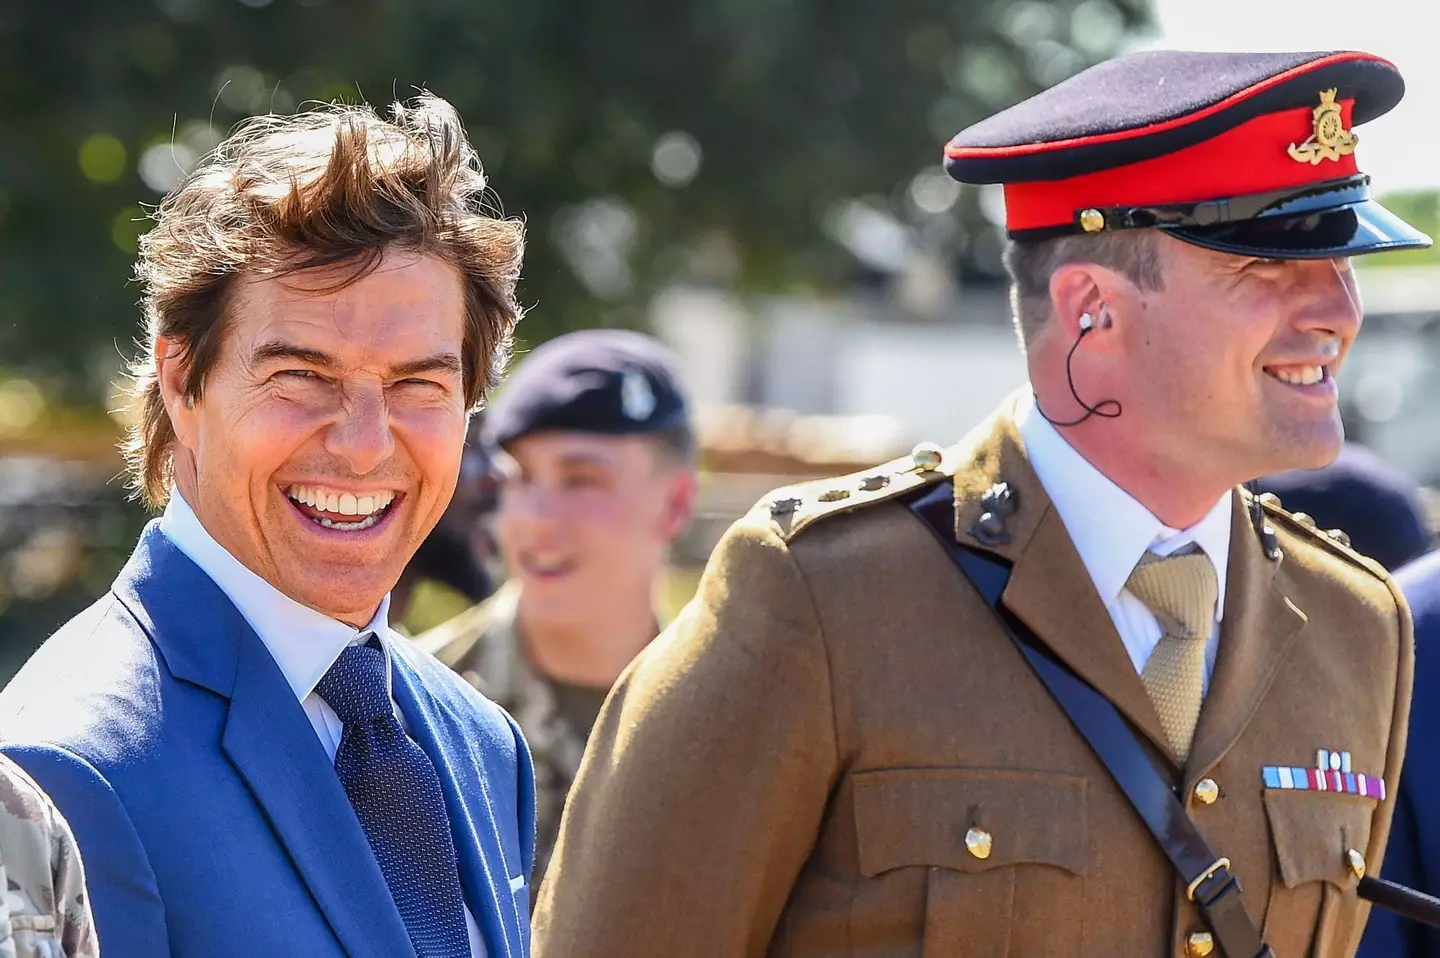 Your mum probably fancies Tom Cruise. He seems rather happy about that.